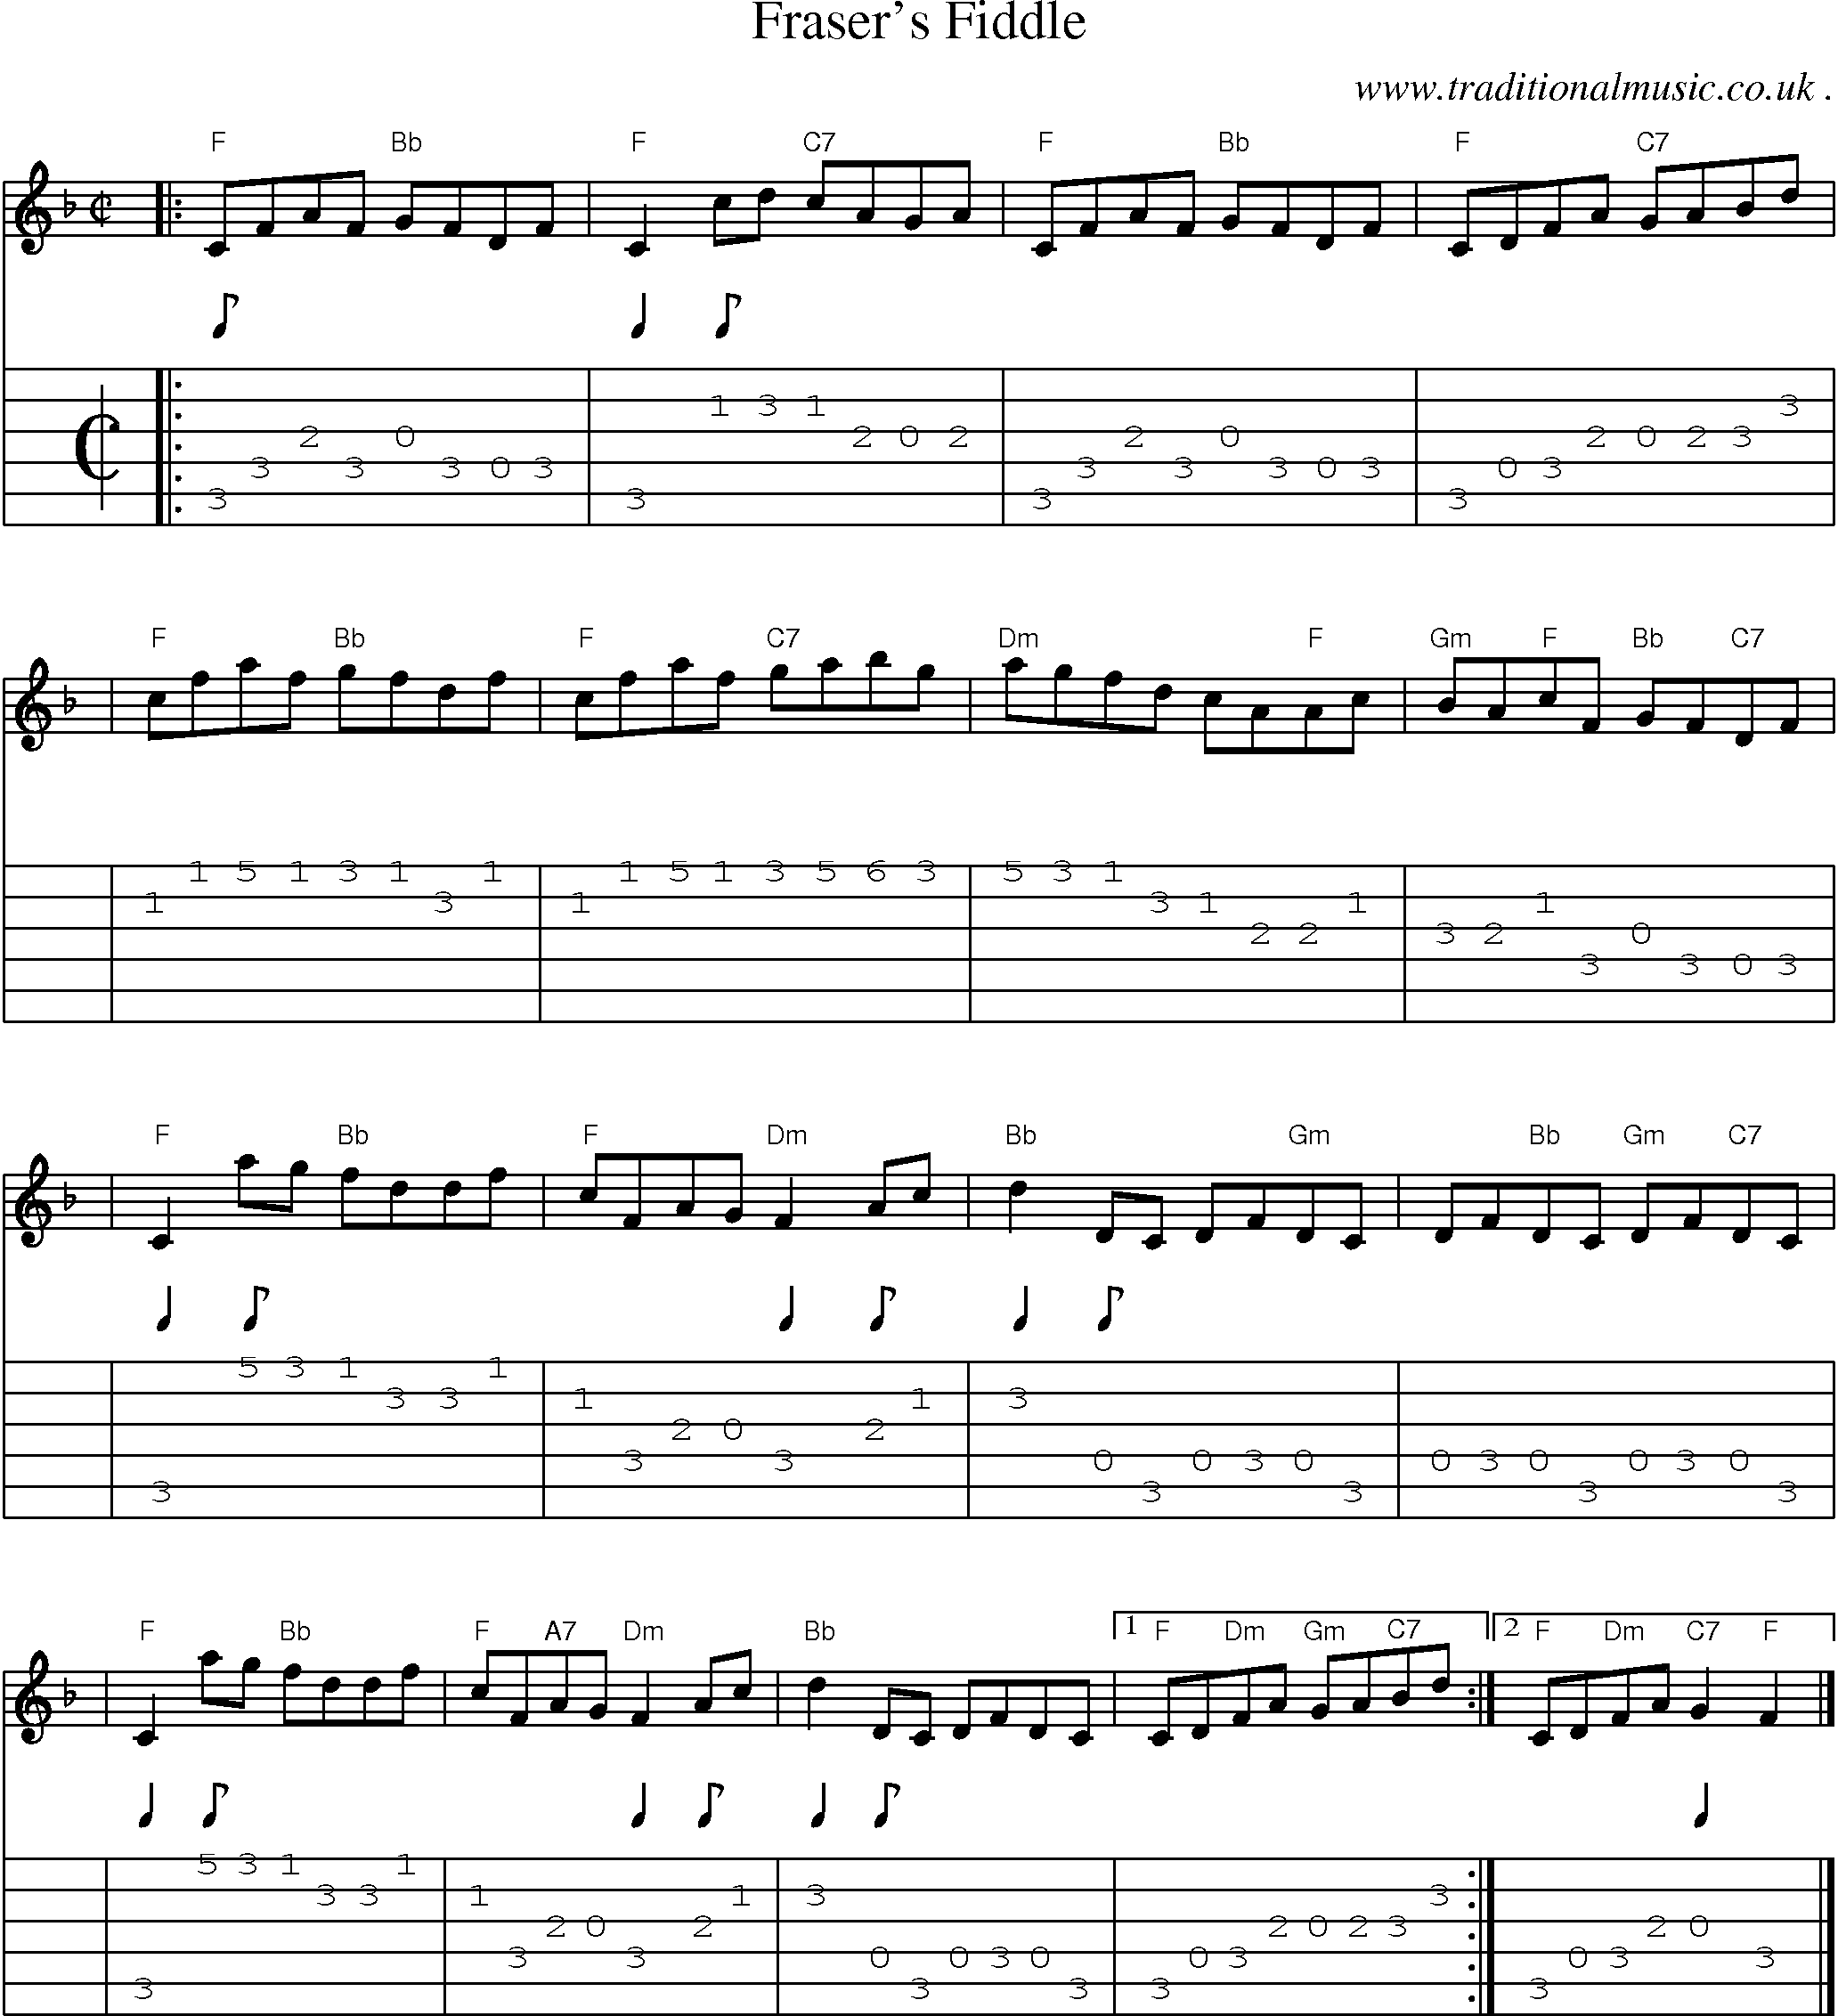 Sheet-music  score, Chords and Guitar Tabs for Frasers Fiddle